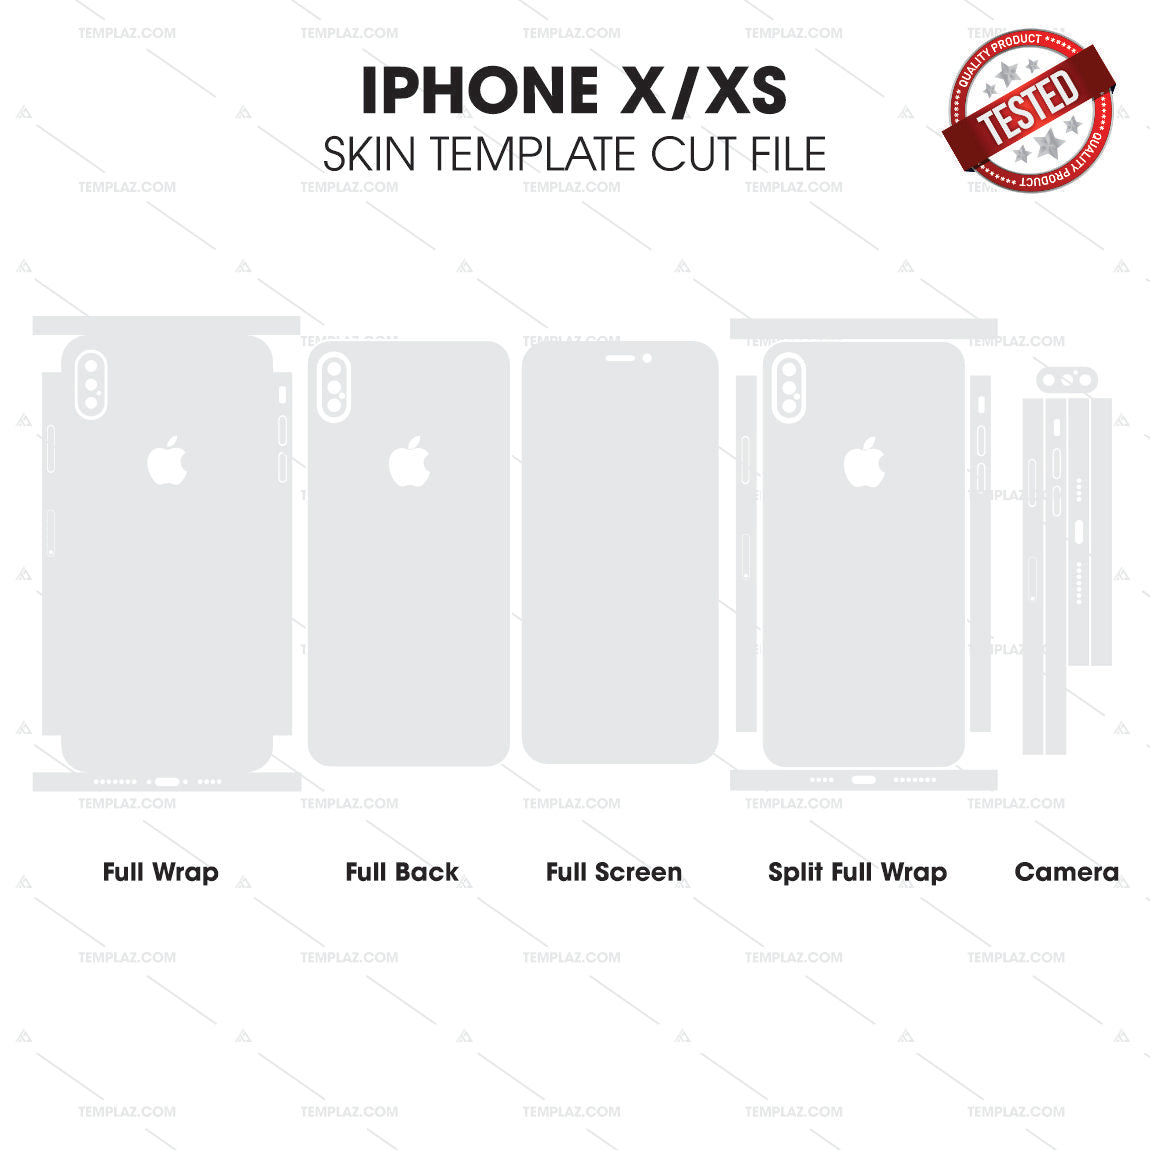 iPhone X and iPhone XS Skin Template Vector Cut File Bundle